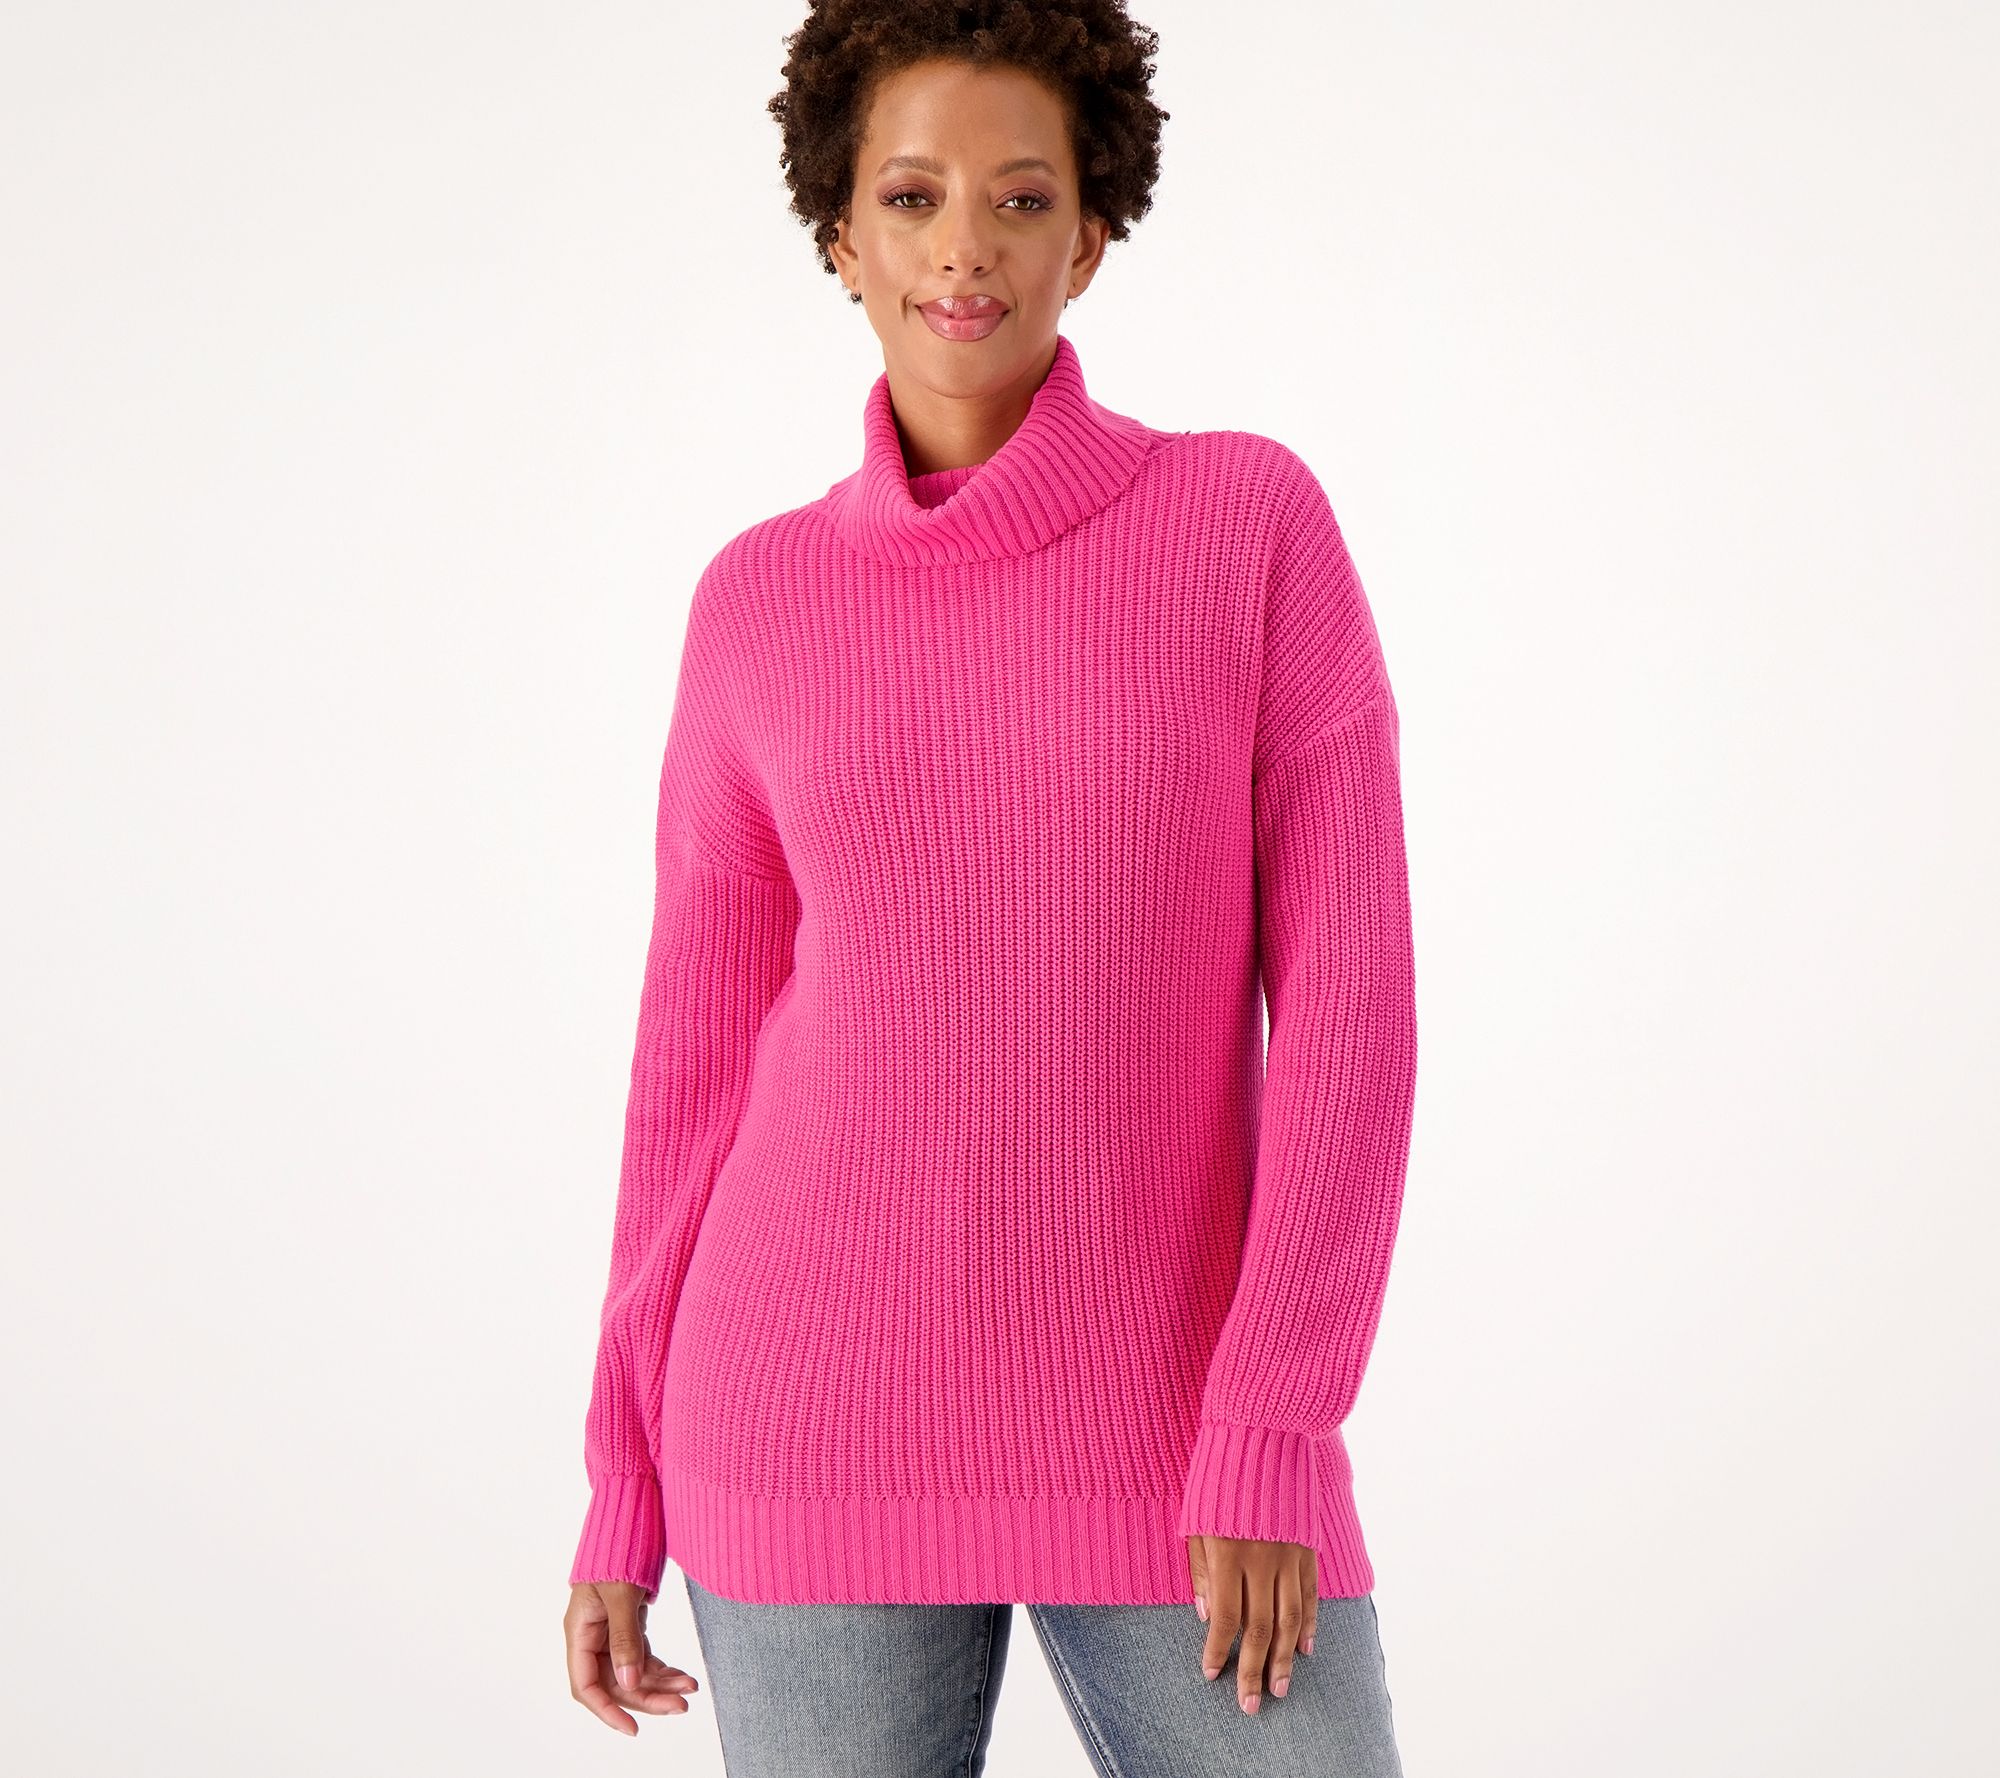 Recreational Habits Dallas Cable Knit Turtleneck Sweater